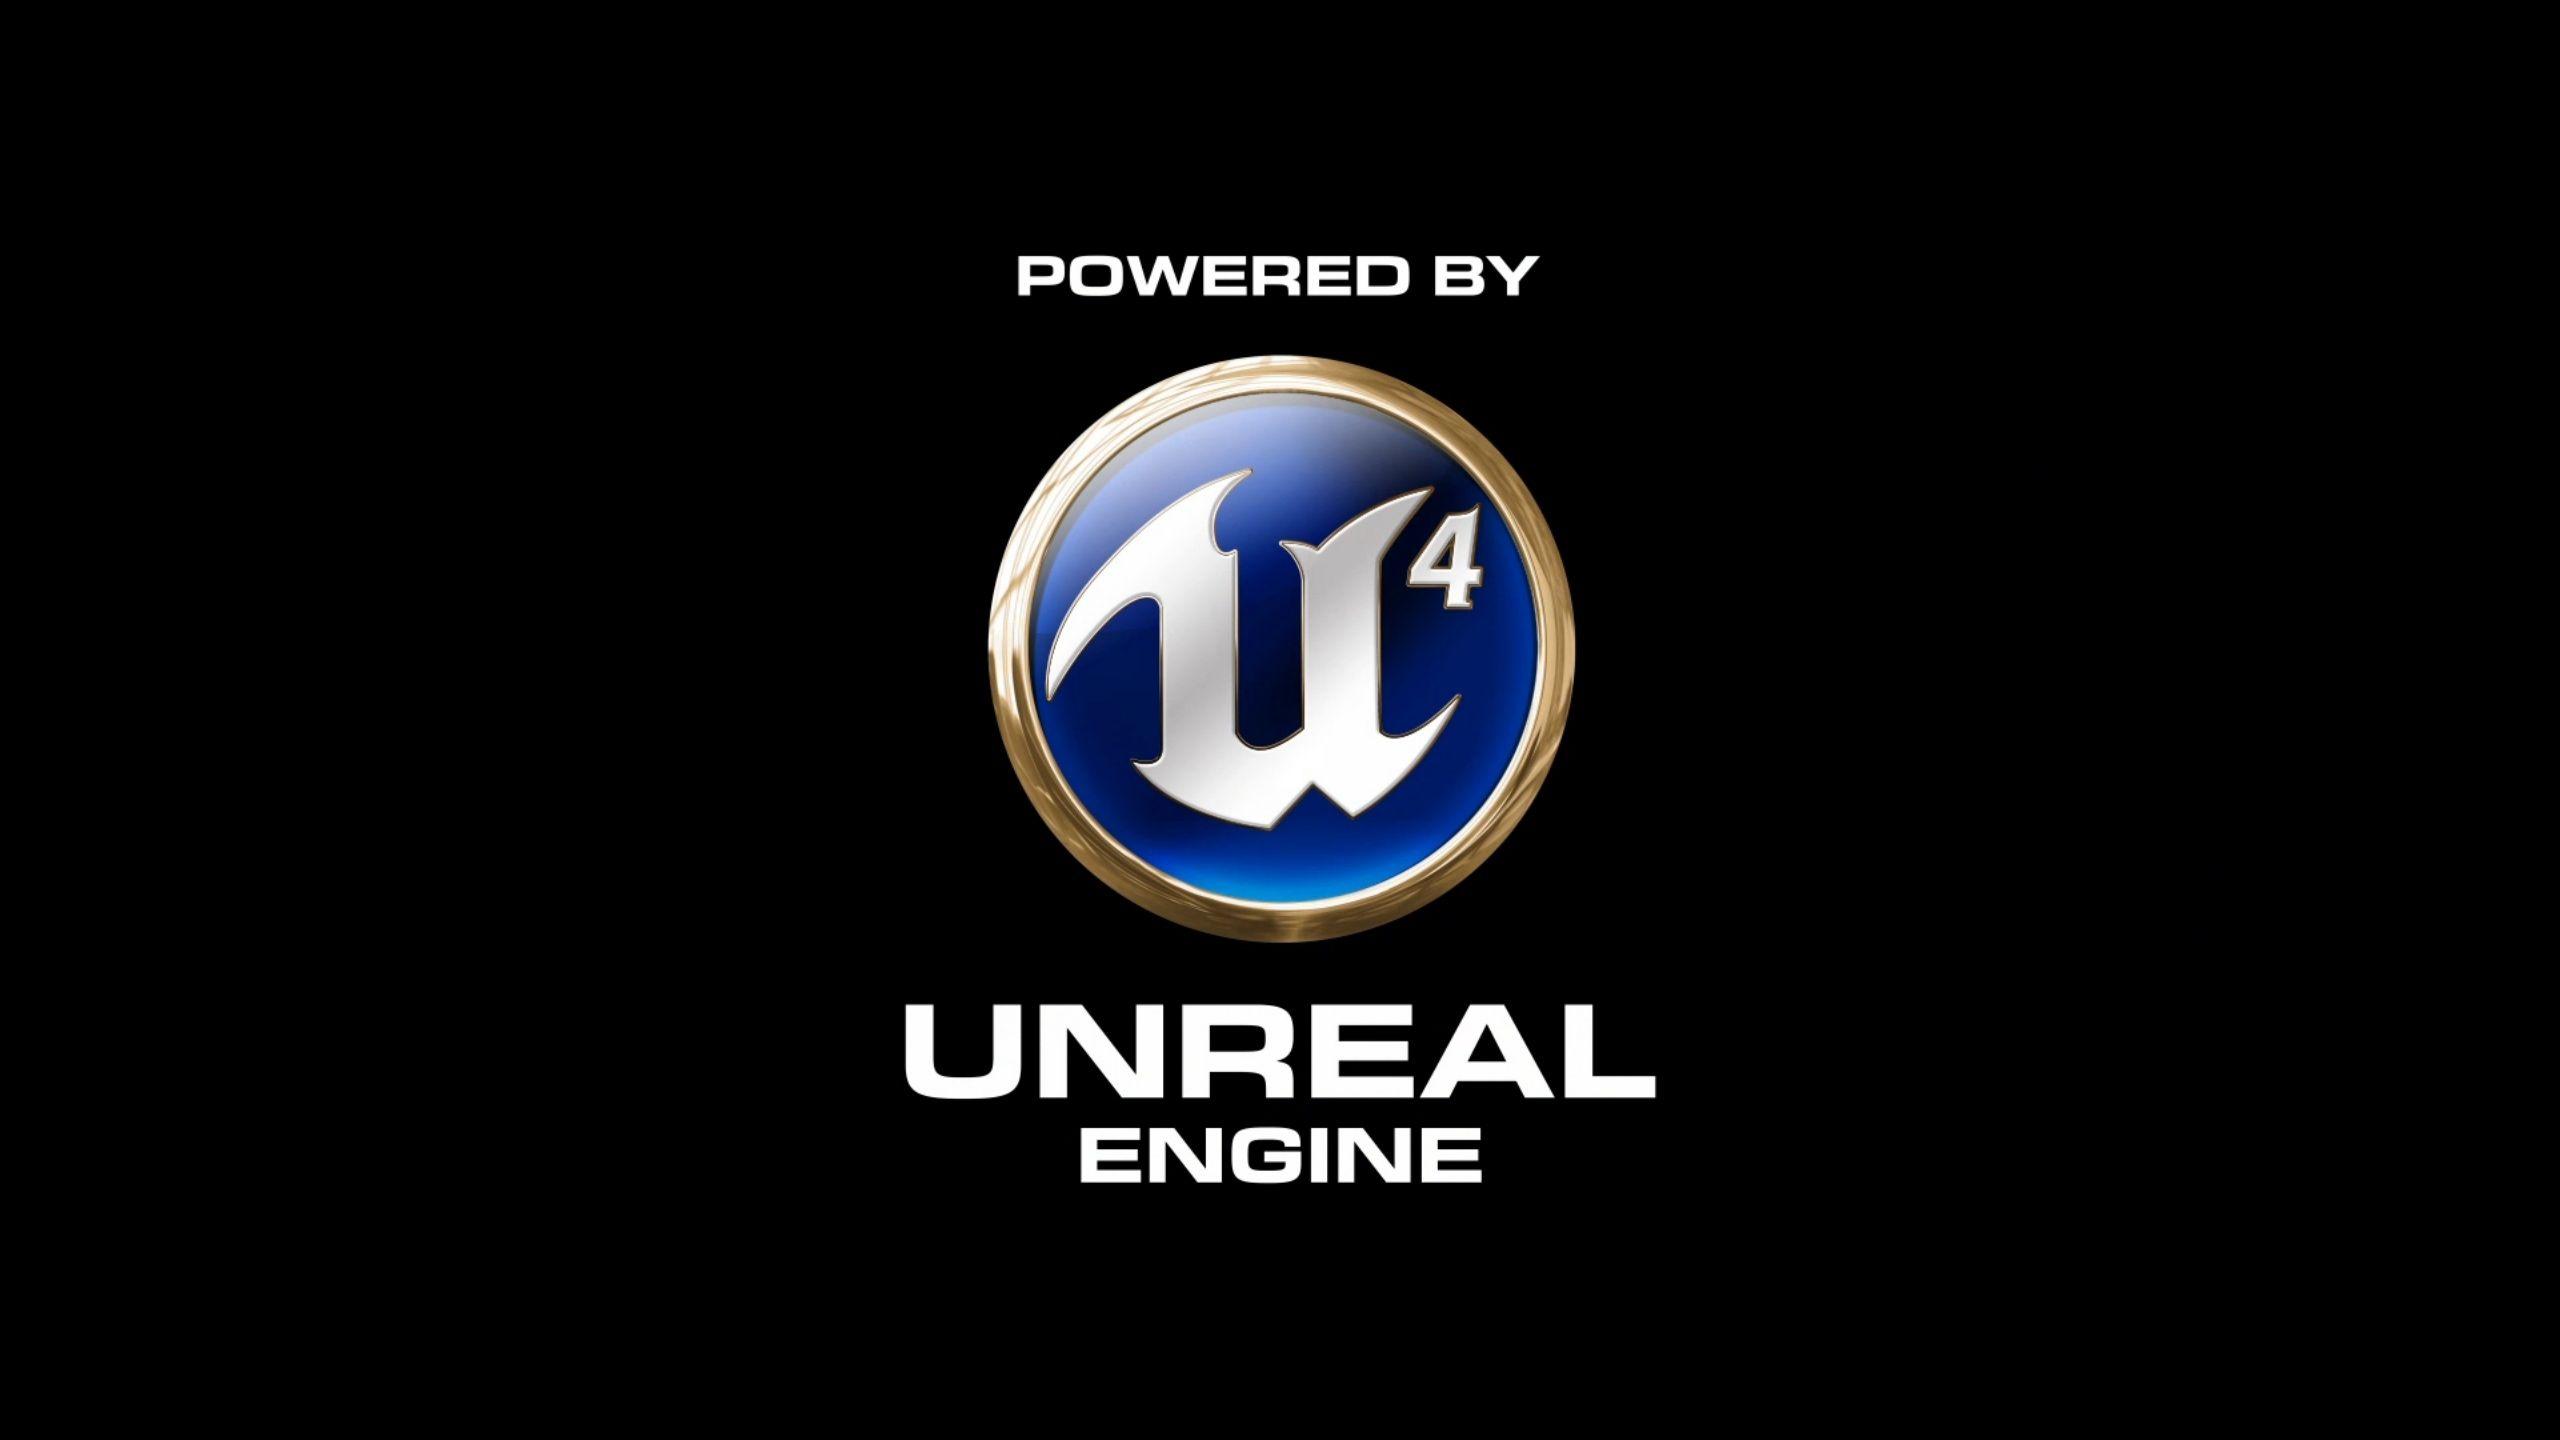 Unreal Logo - Unreal Engine's logo is an outdated abomination